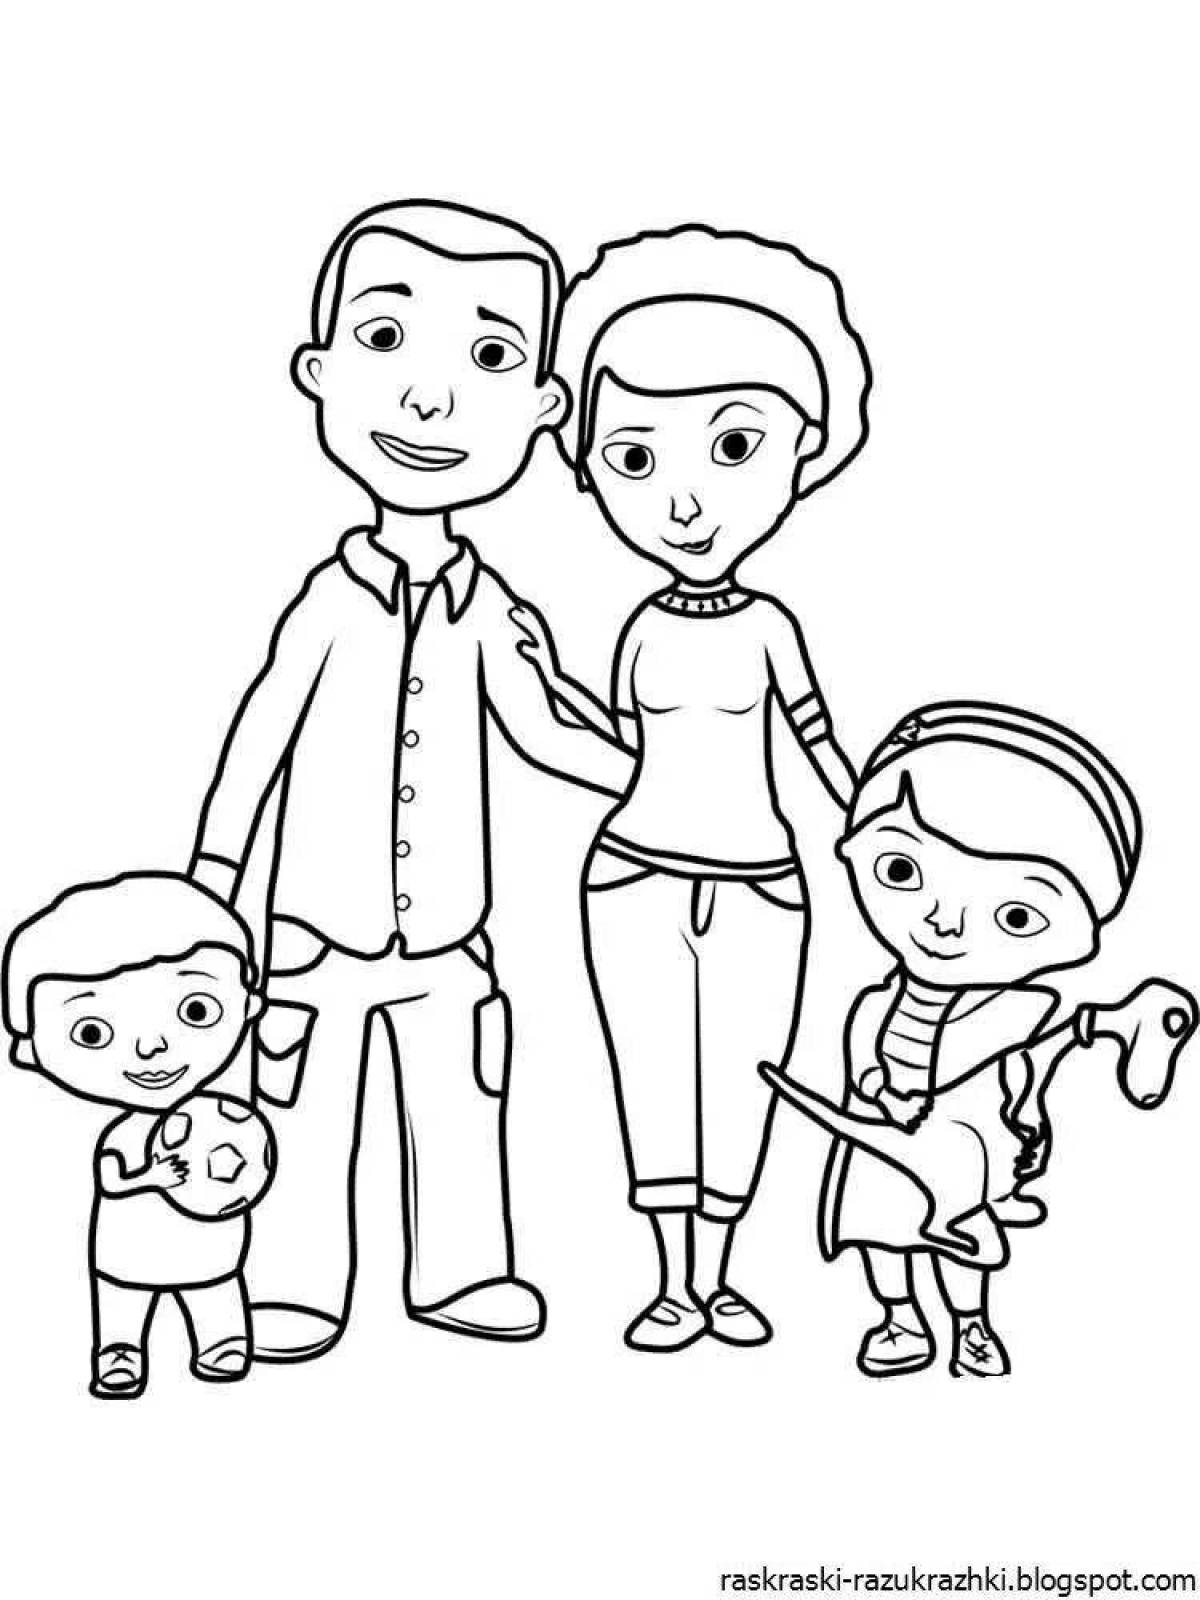 Fairytale family coloring picture